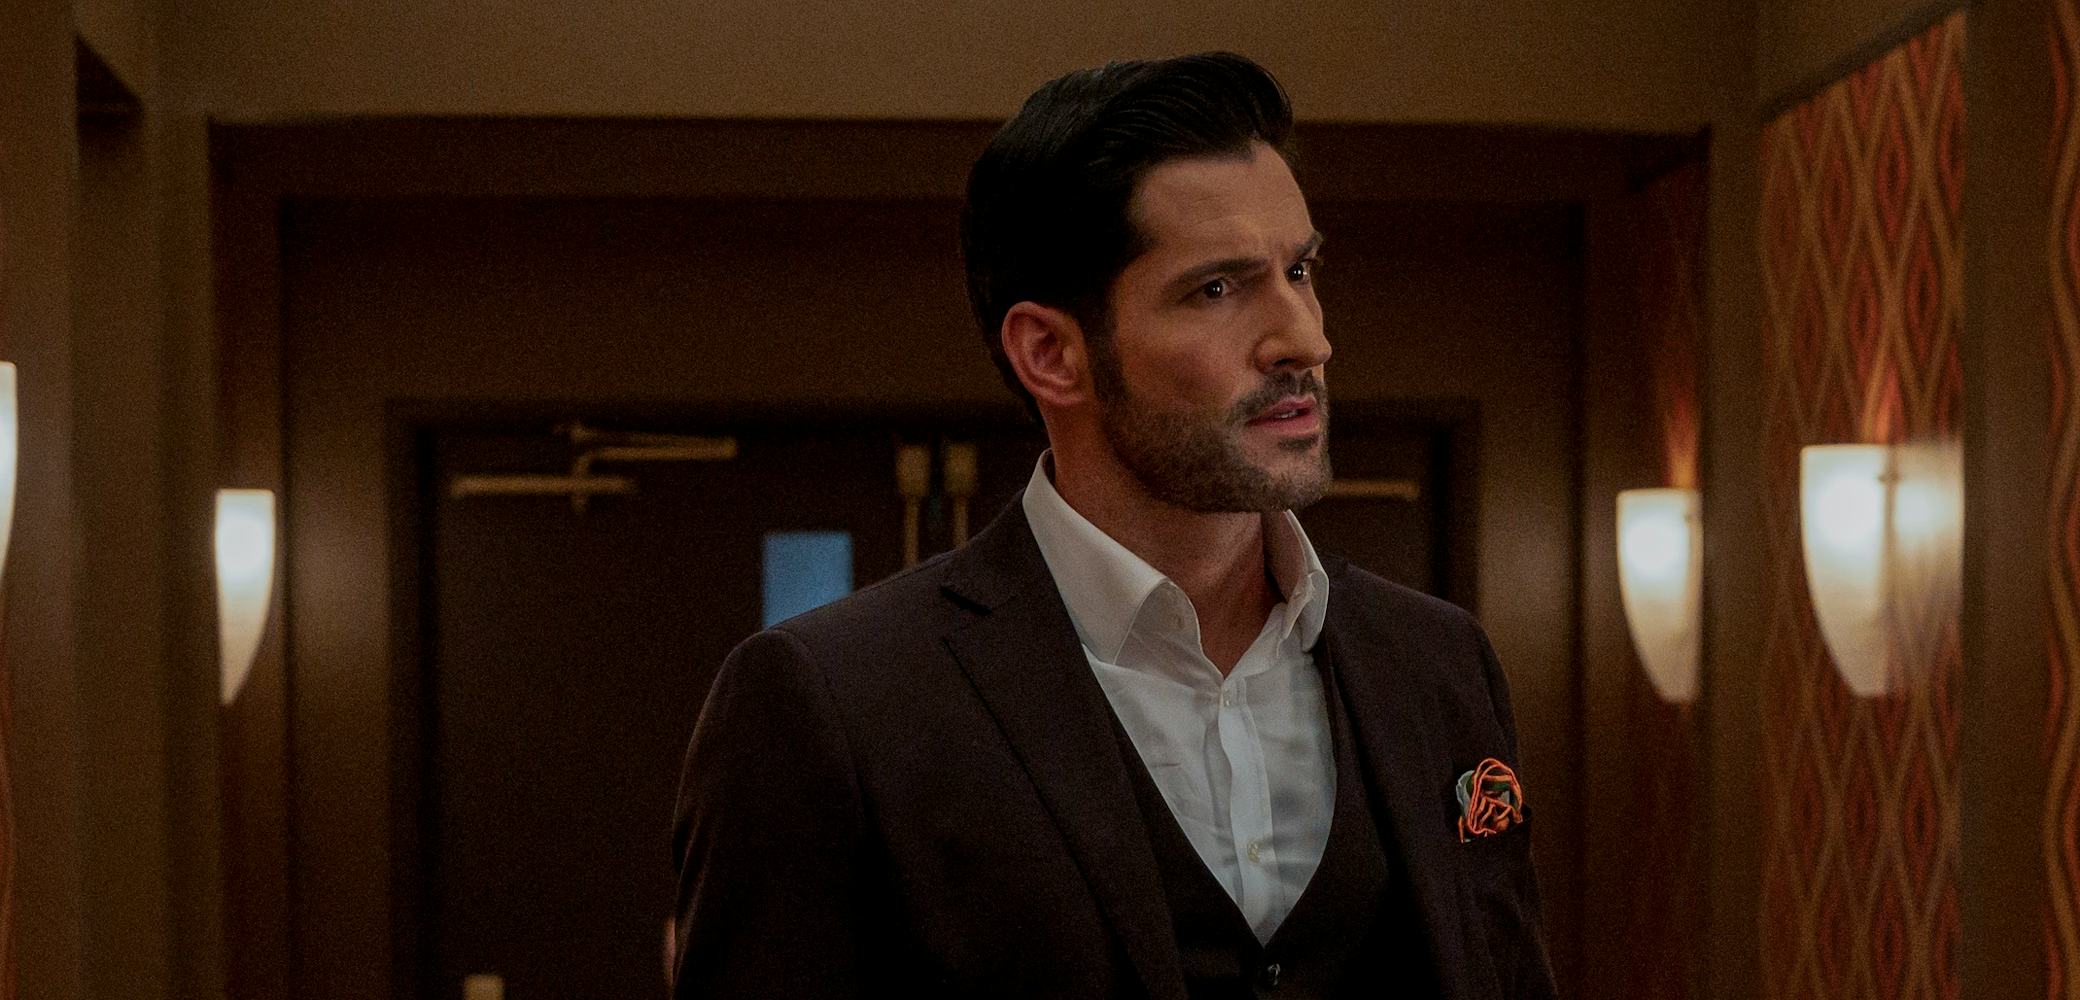 'Lucifer' Season 5 Part 2 release date may introduce a wild mojo twist